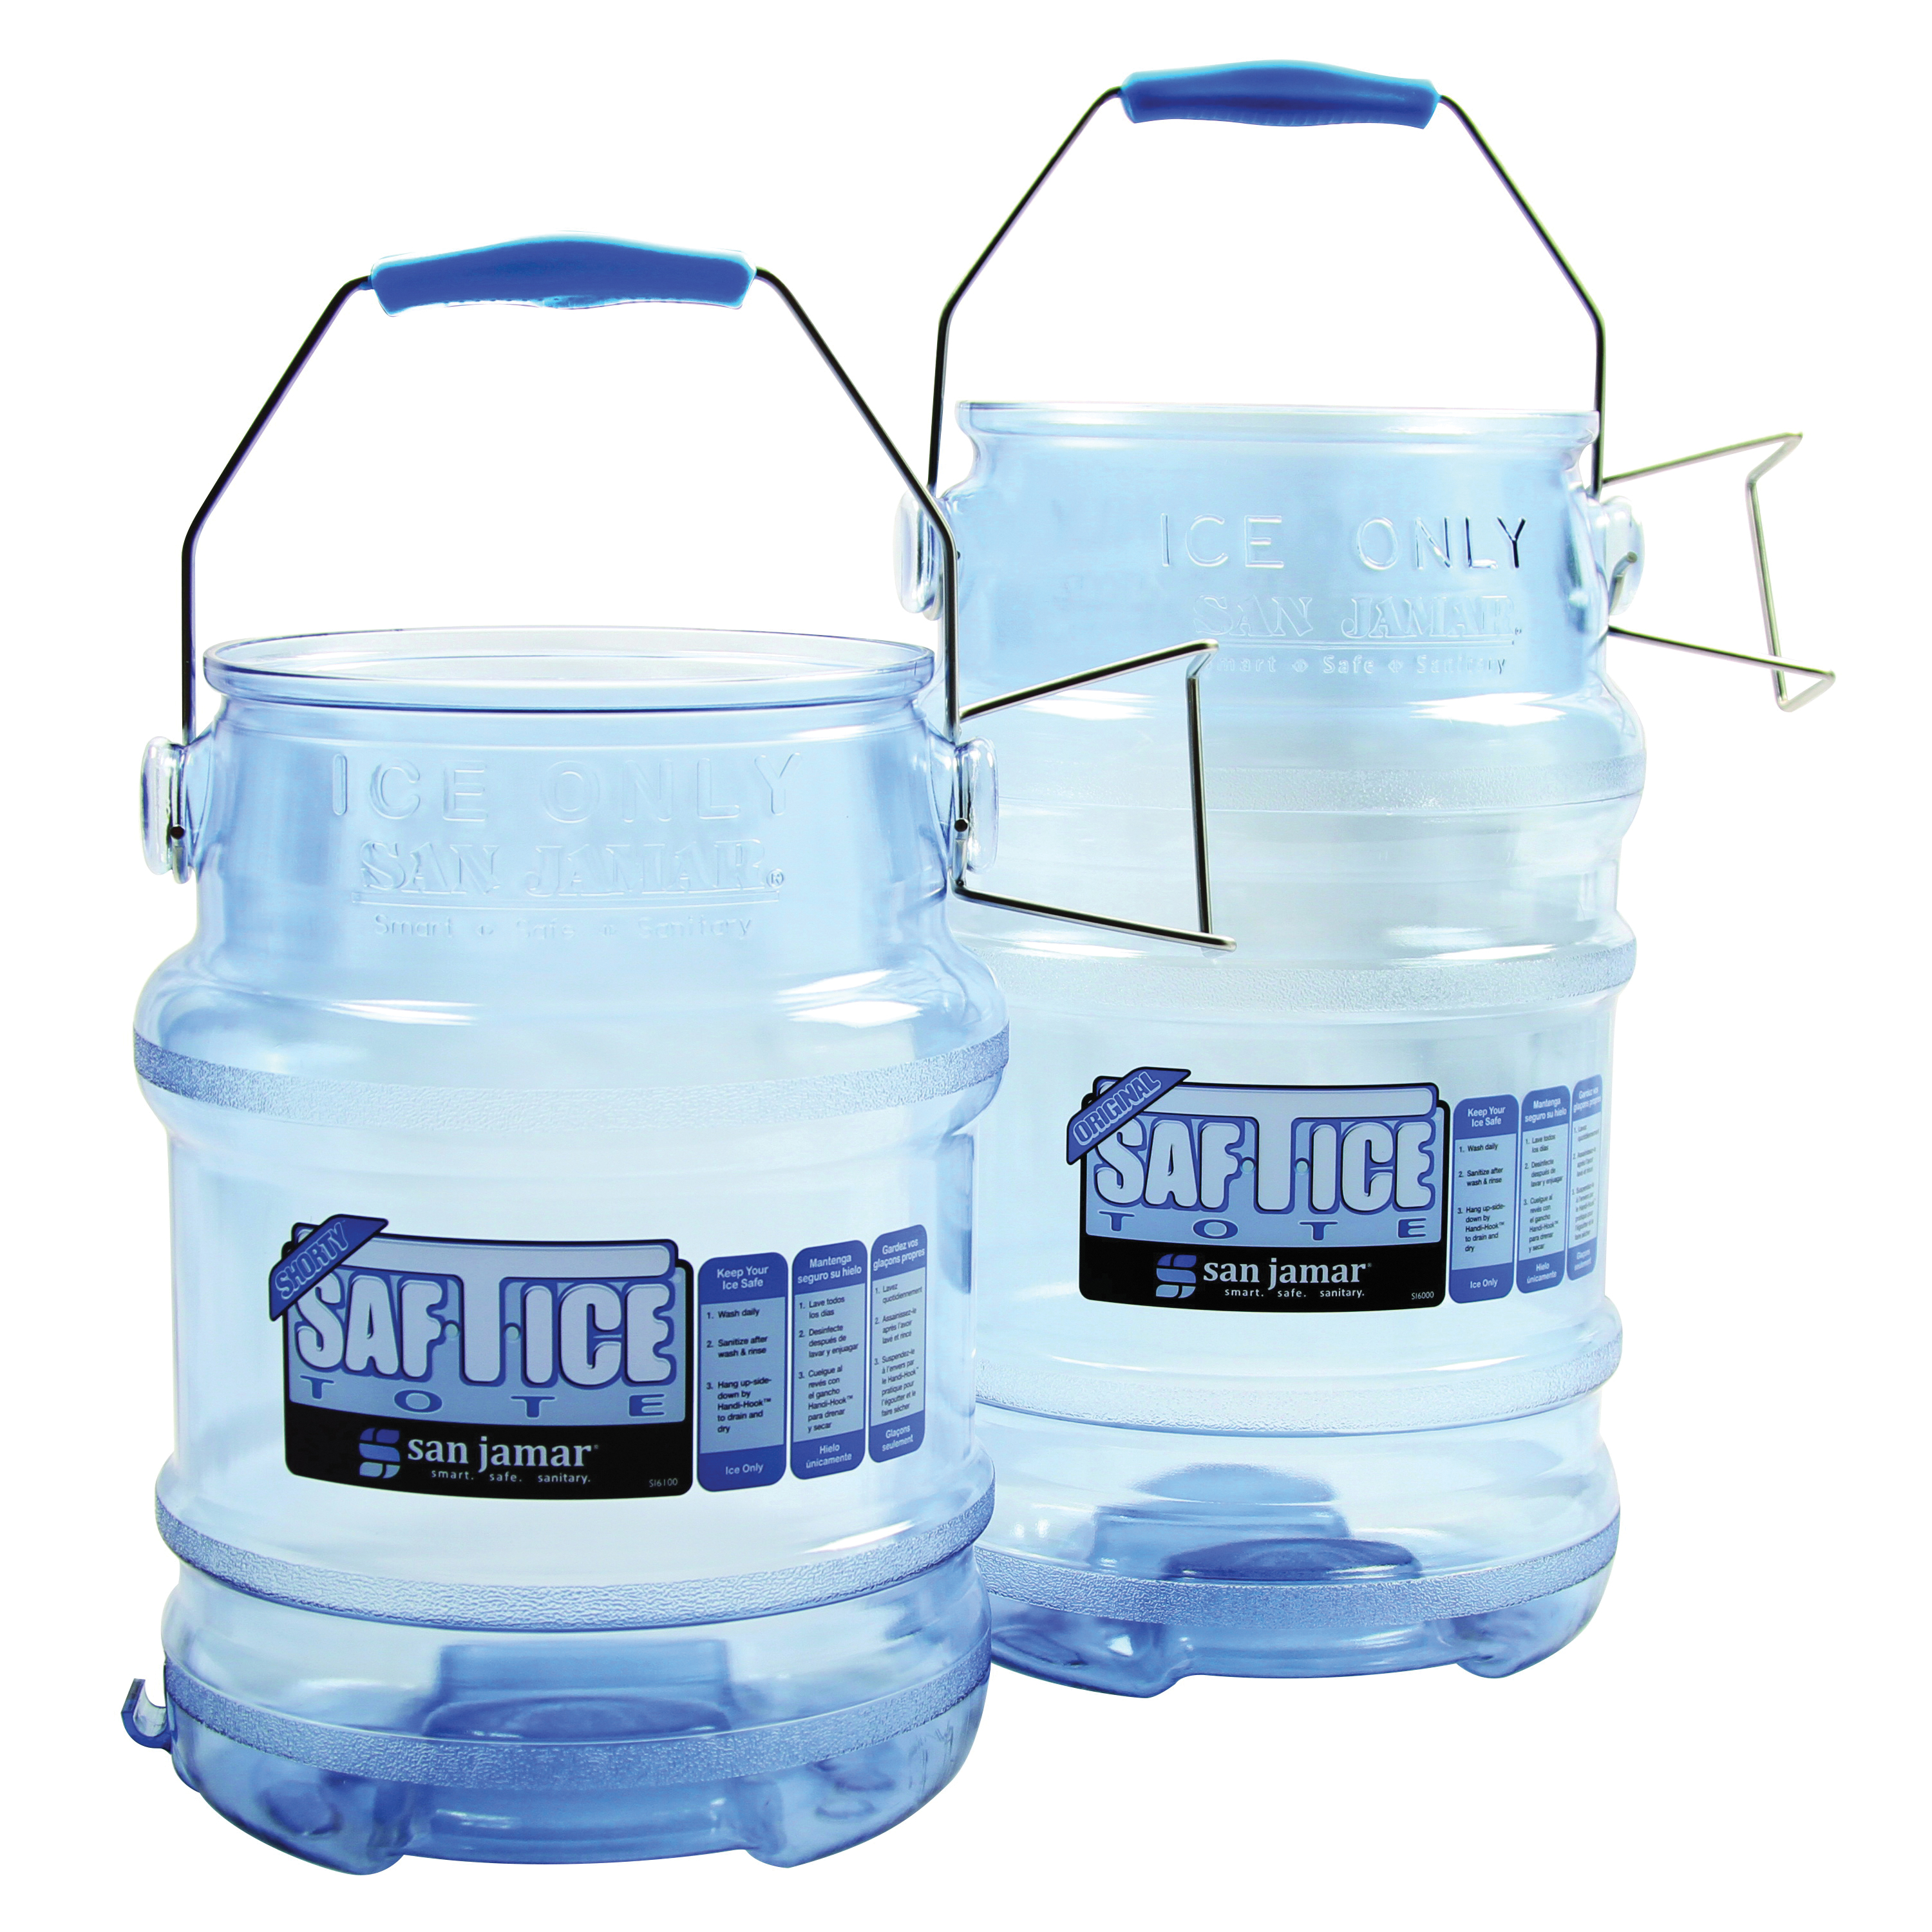 SI6000 ICE TOTE/PAIL EACHSTOCK 2 PER CASE/SOLD EACH